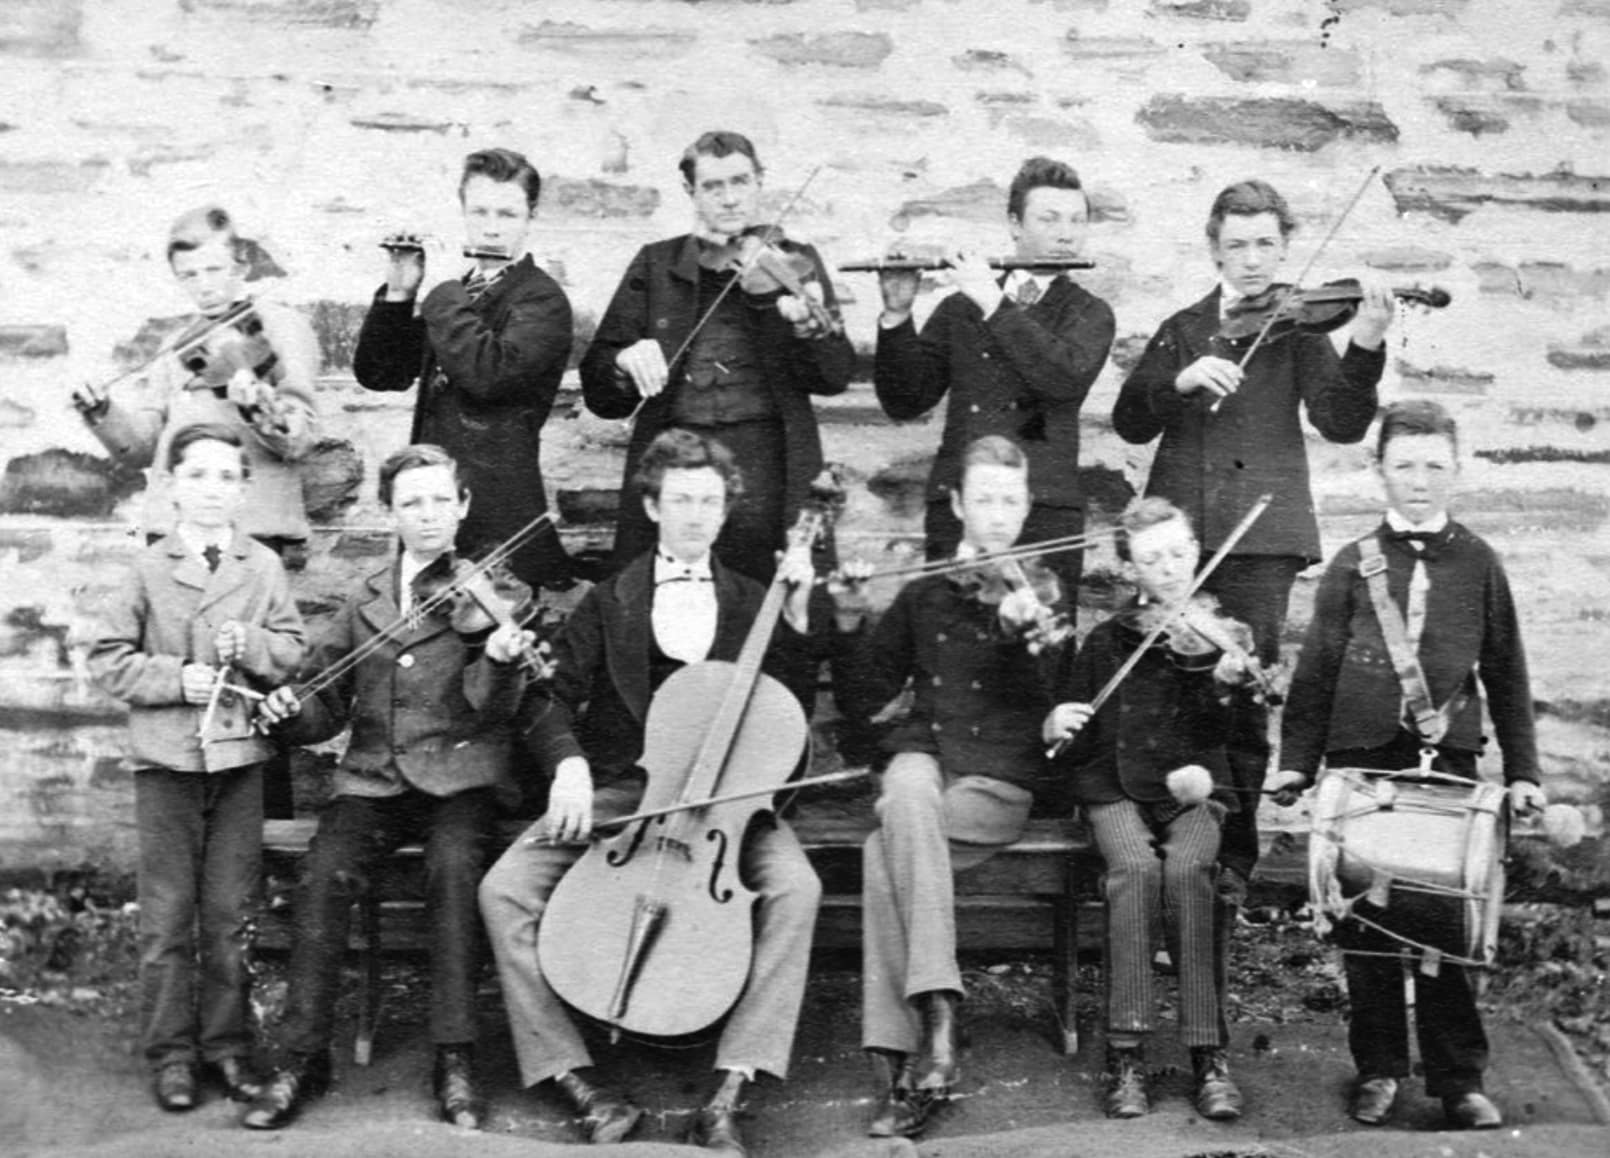 James Bailey Bassett, violin, back row centre, and the band of the Willunga Band of Hope, 1873 (Willunga Historical Society)